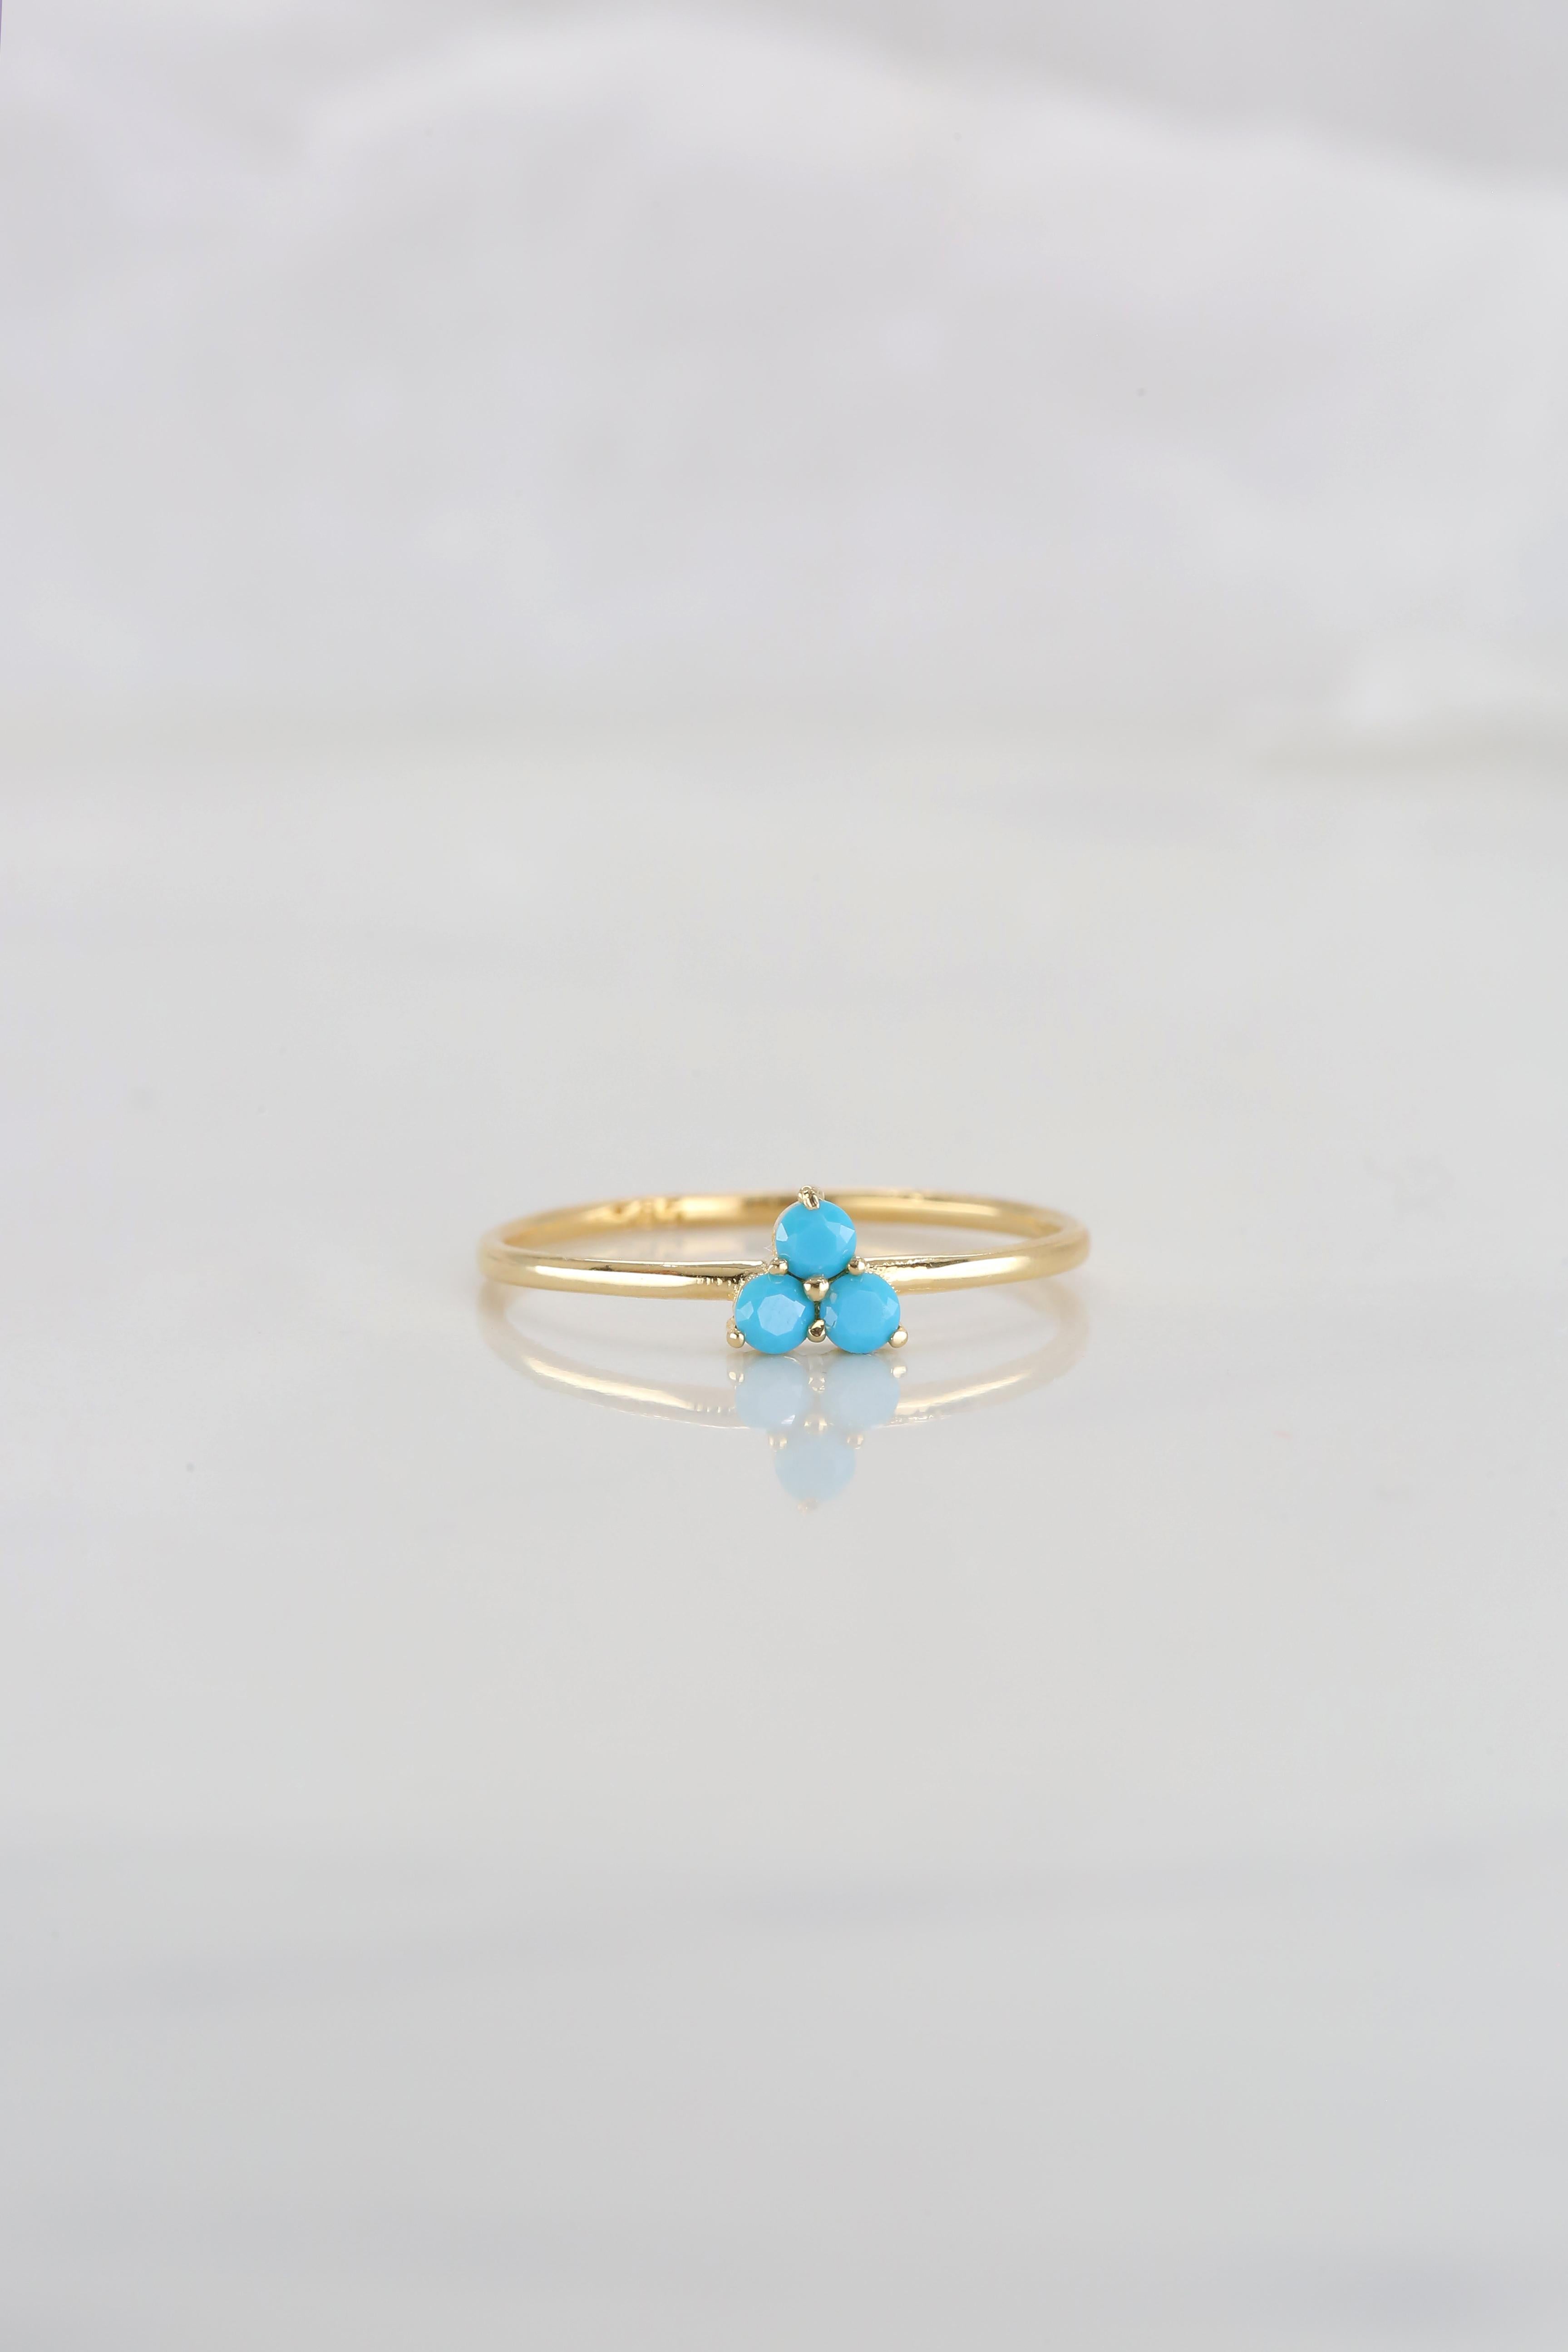 For Sale:  Dainty Turquoise Ring, 14K Dainty Gold Turquoise Ring, Gold Turquoise Ring 6